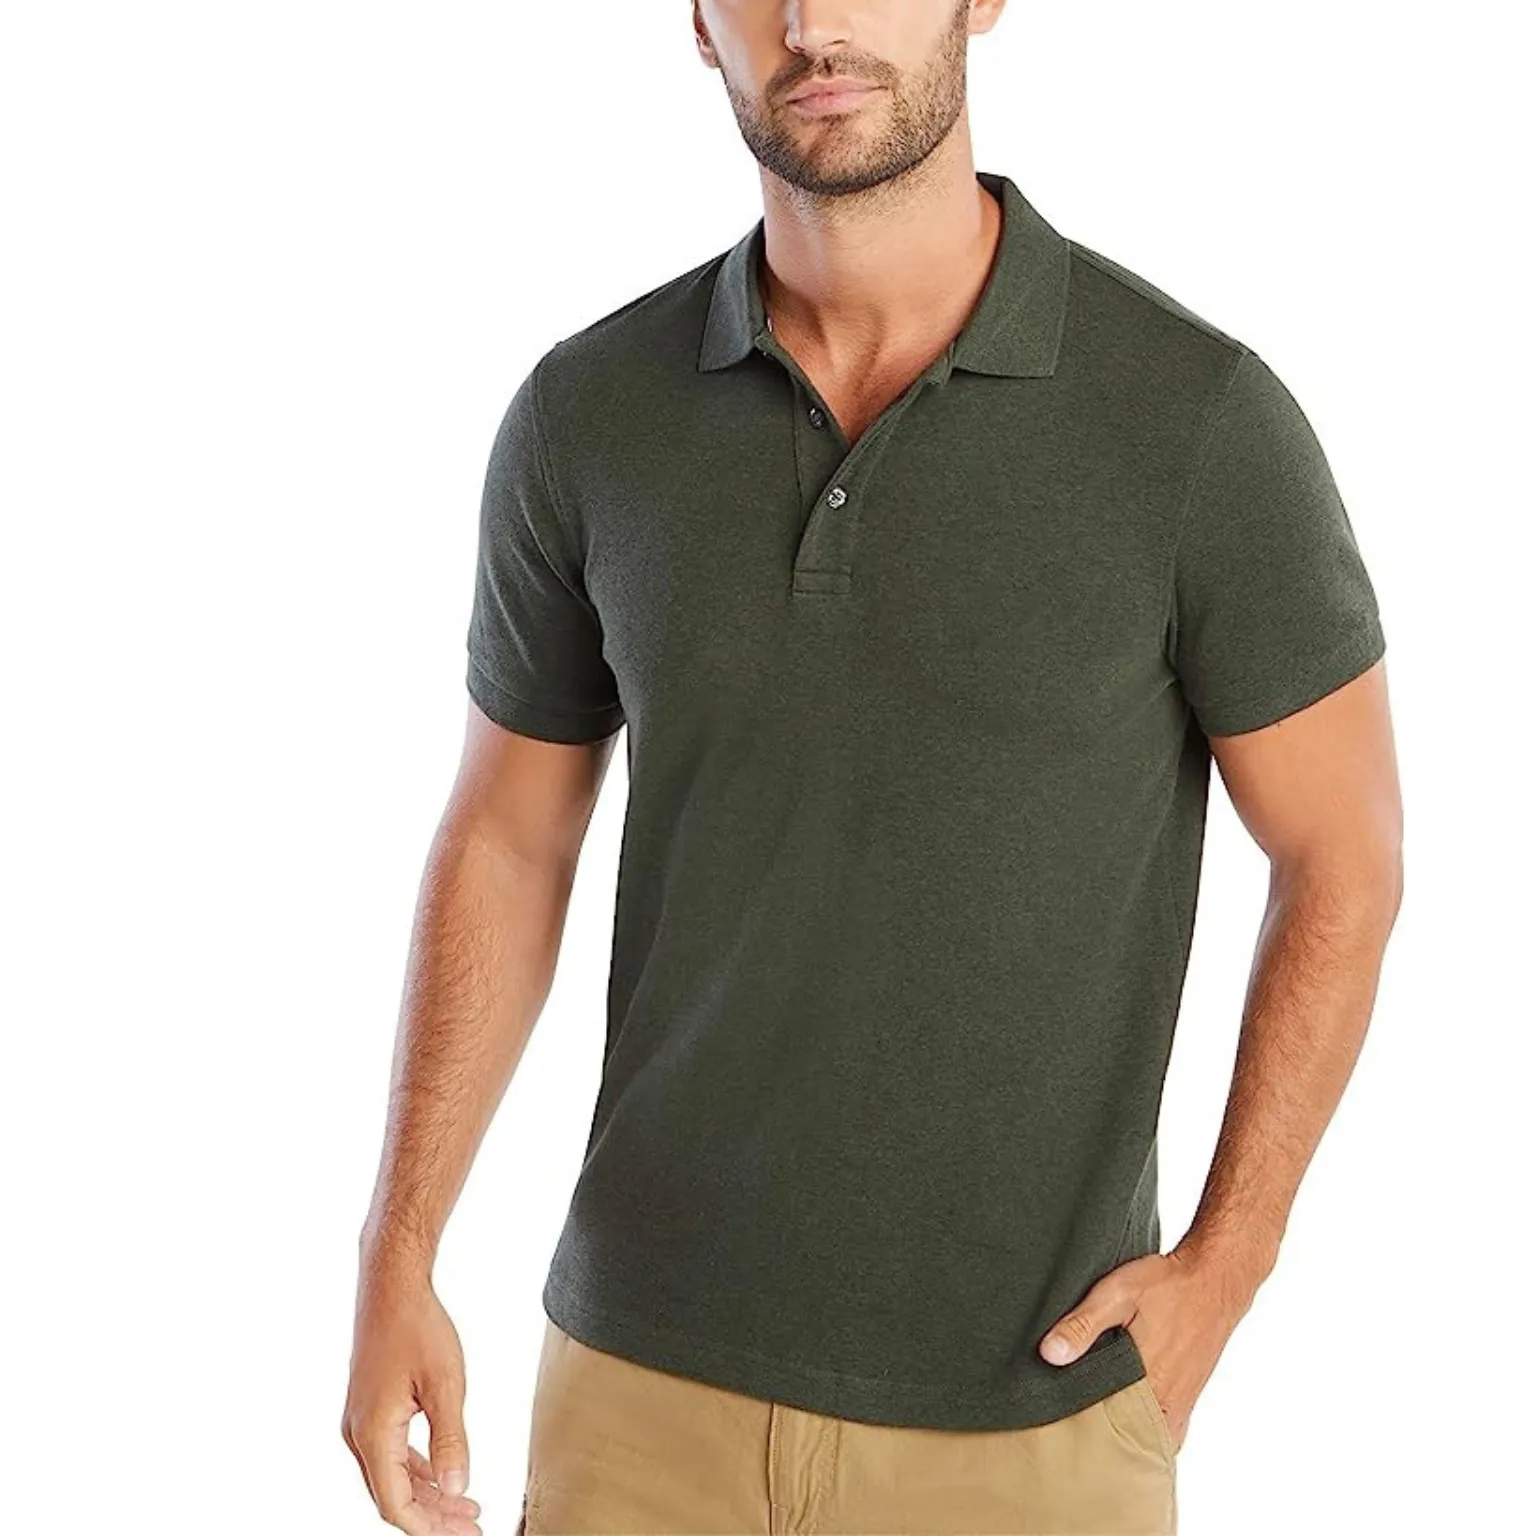 Slim Fit Polo Shirts manufacturing with trendy design